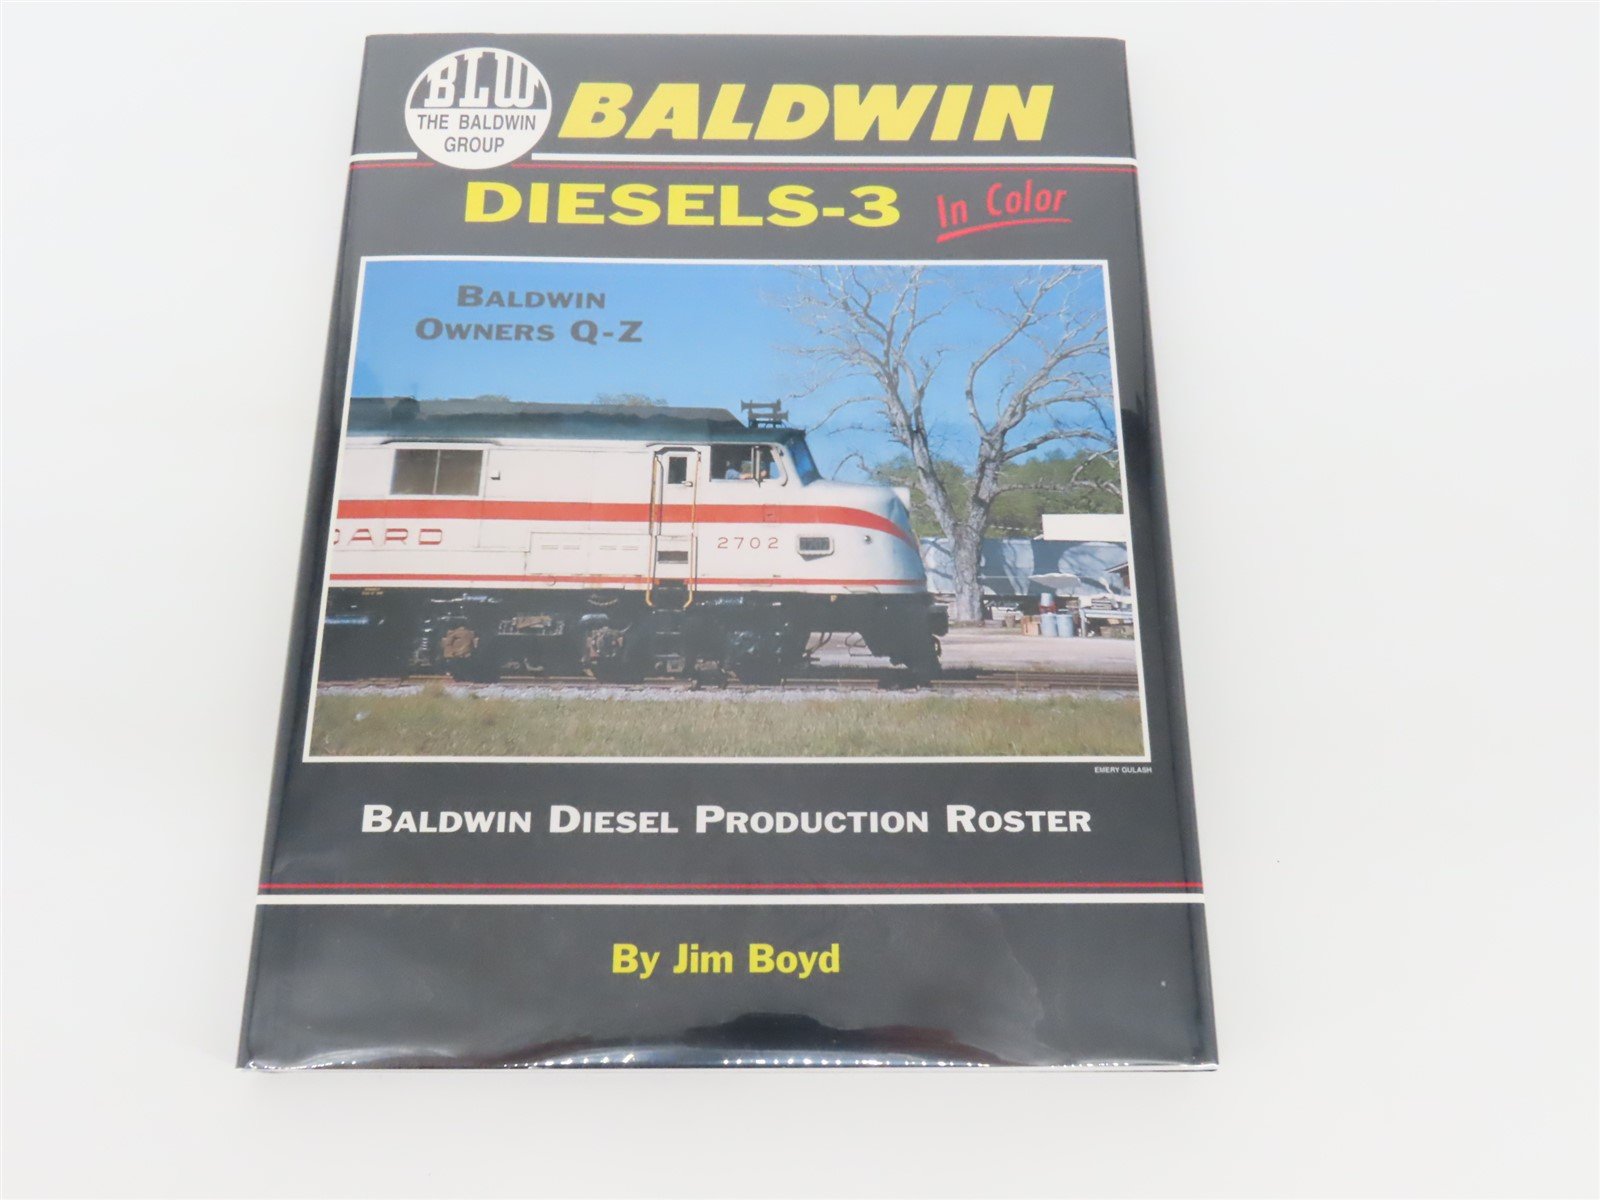 Morning Sun: Baldwin Diesels-3 Owners Q-Z Production Roster by Jim Boyd ©2002 HC